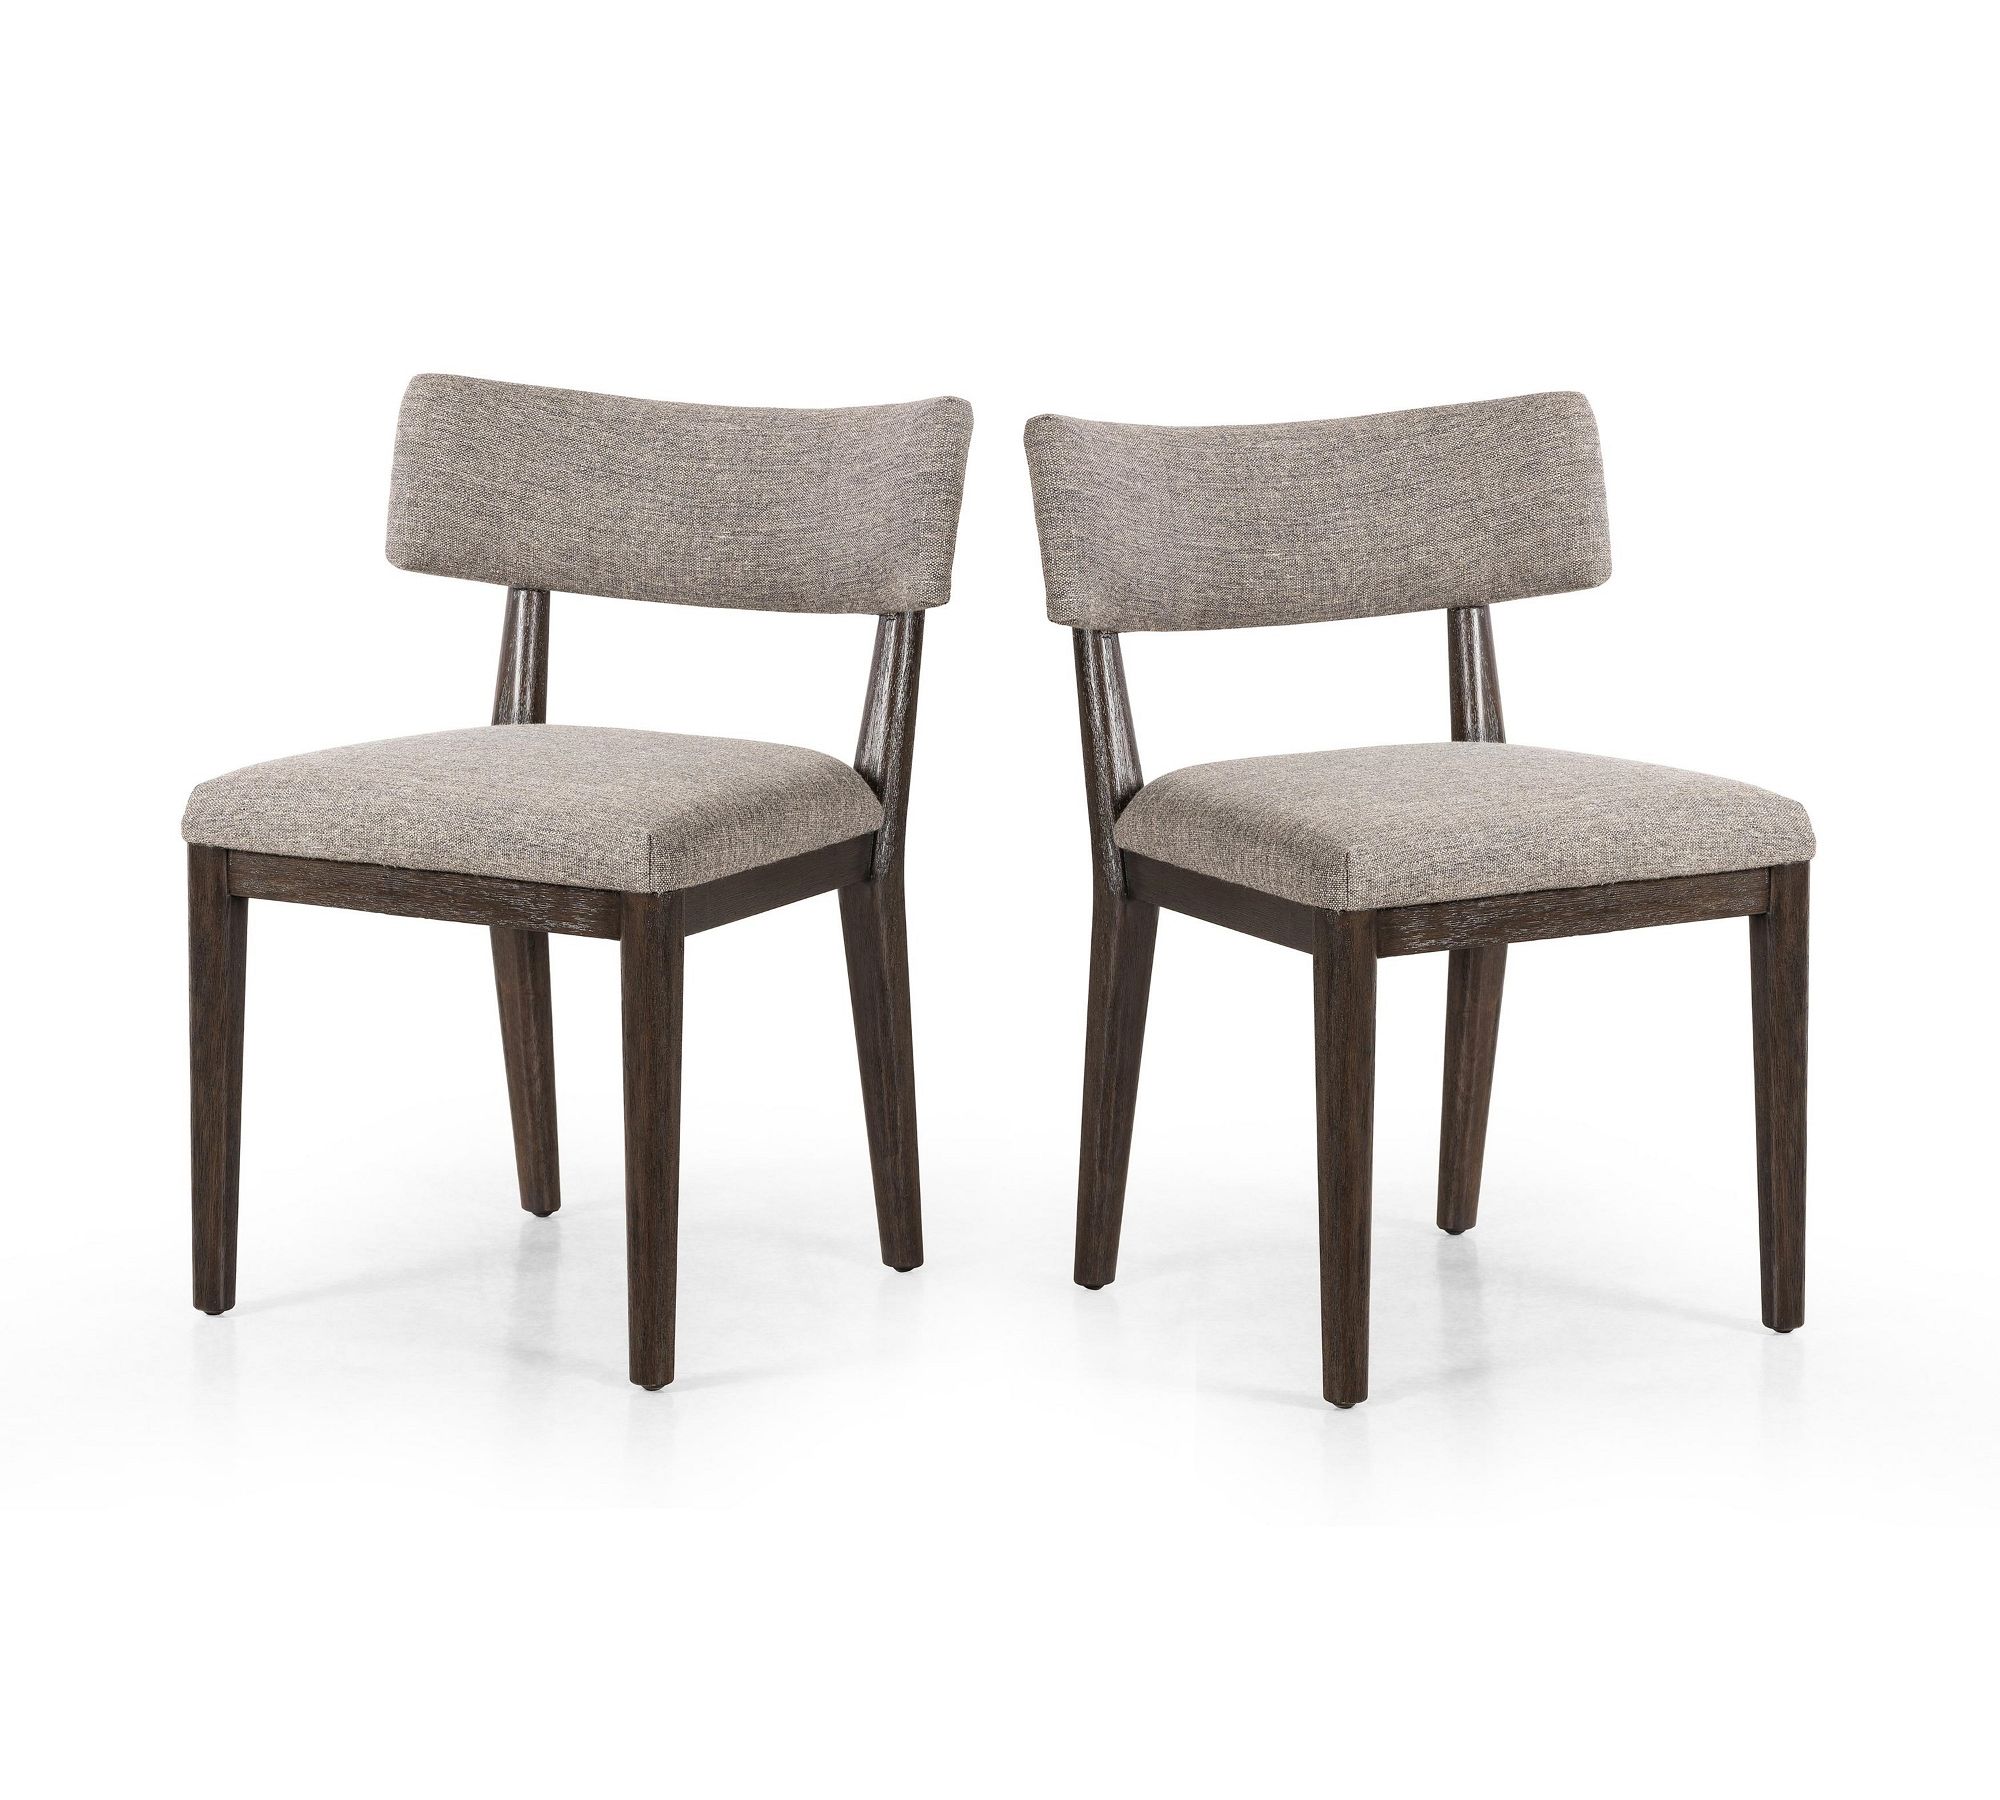 Pardy Upholstered Dining Chairs - Set of 2